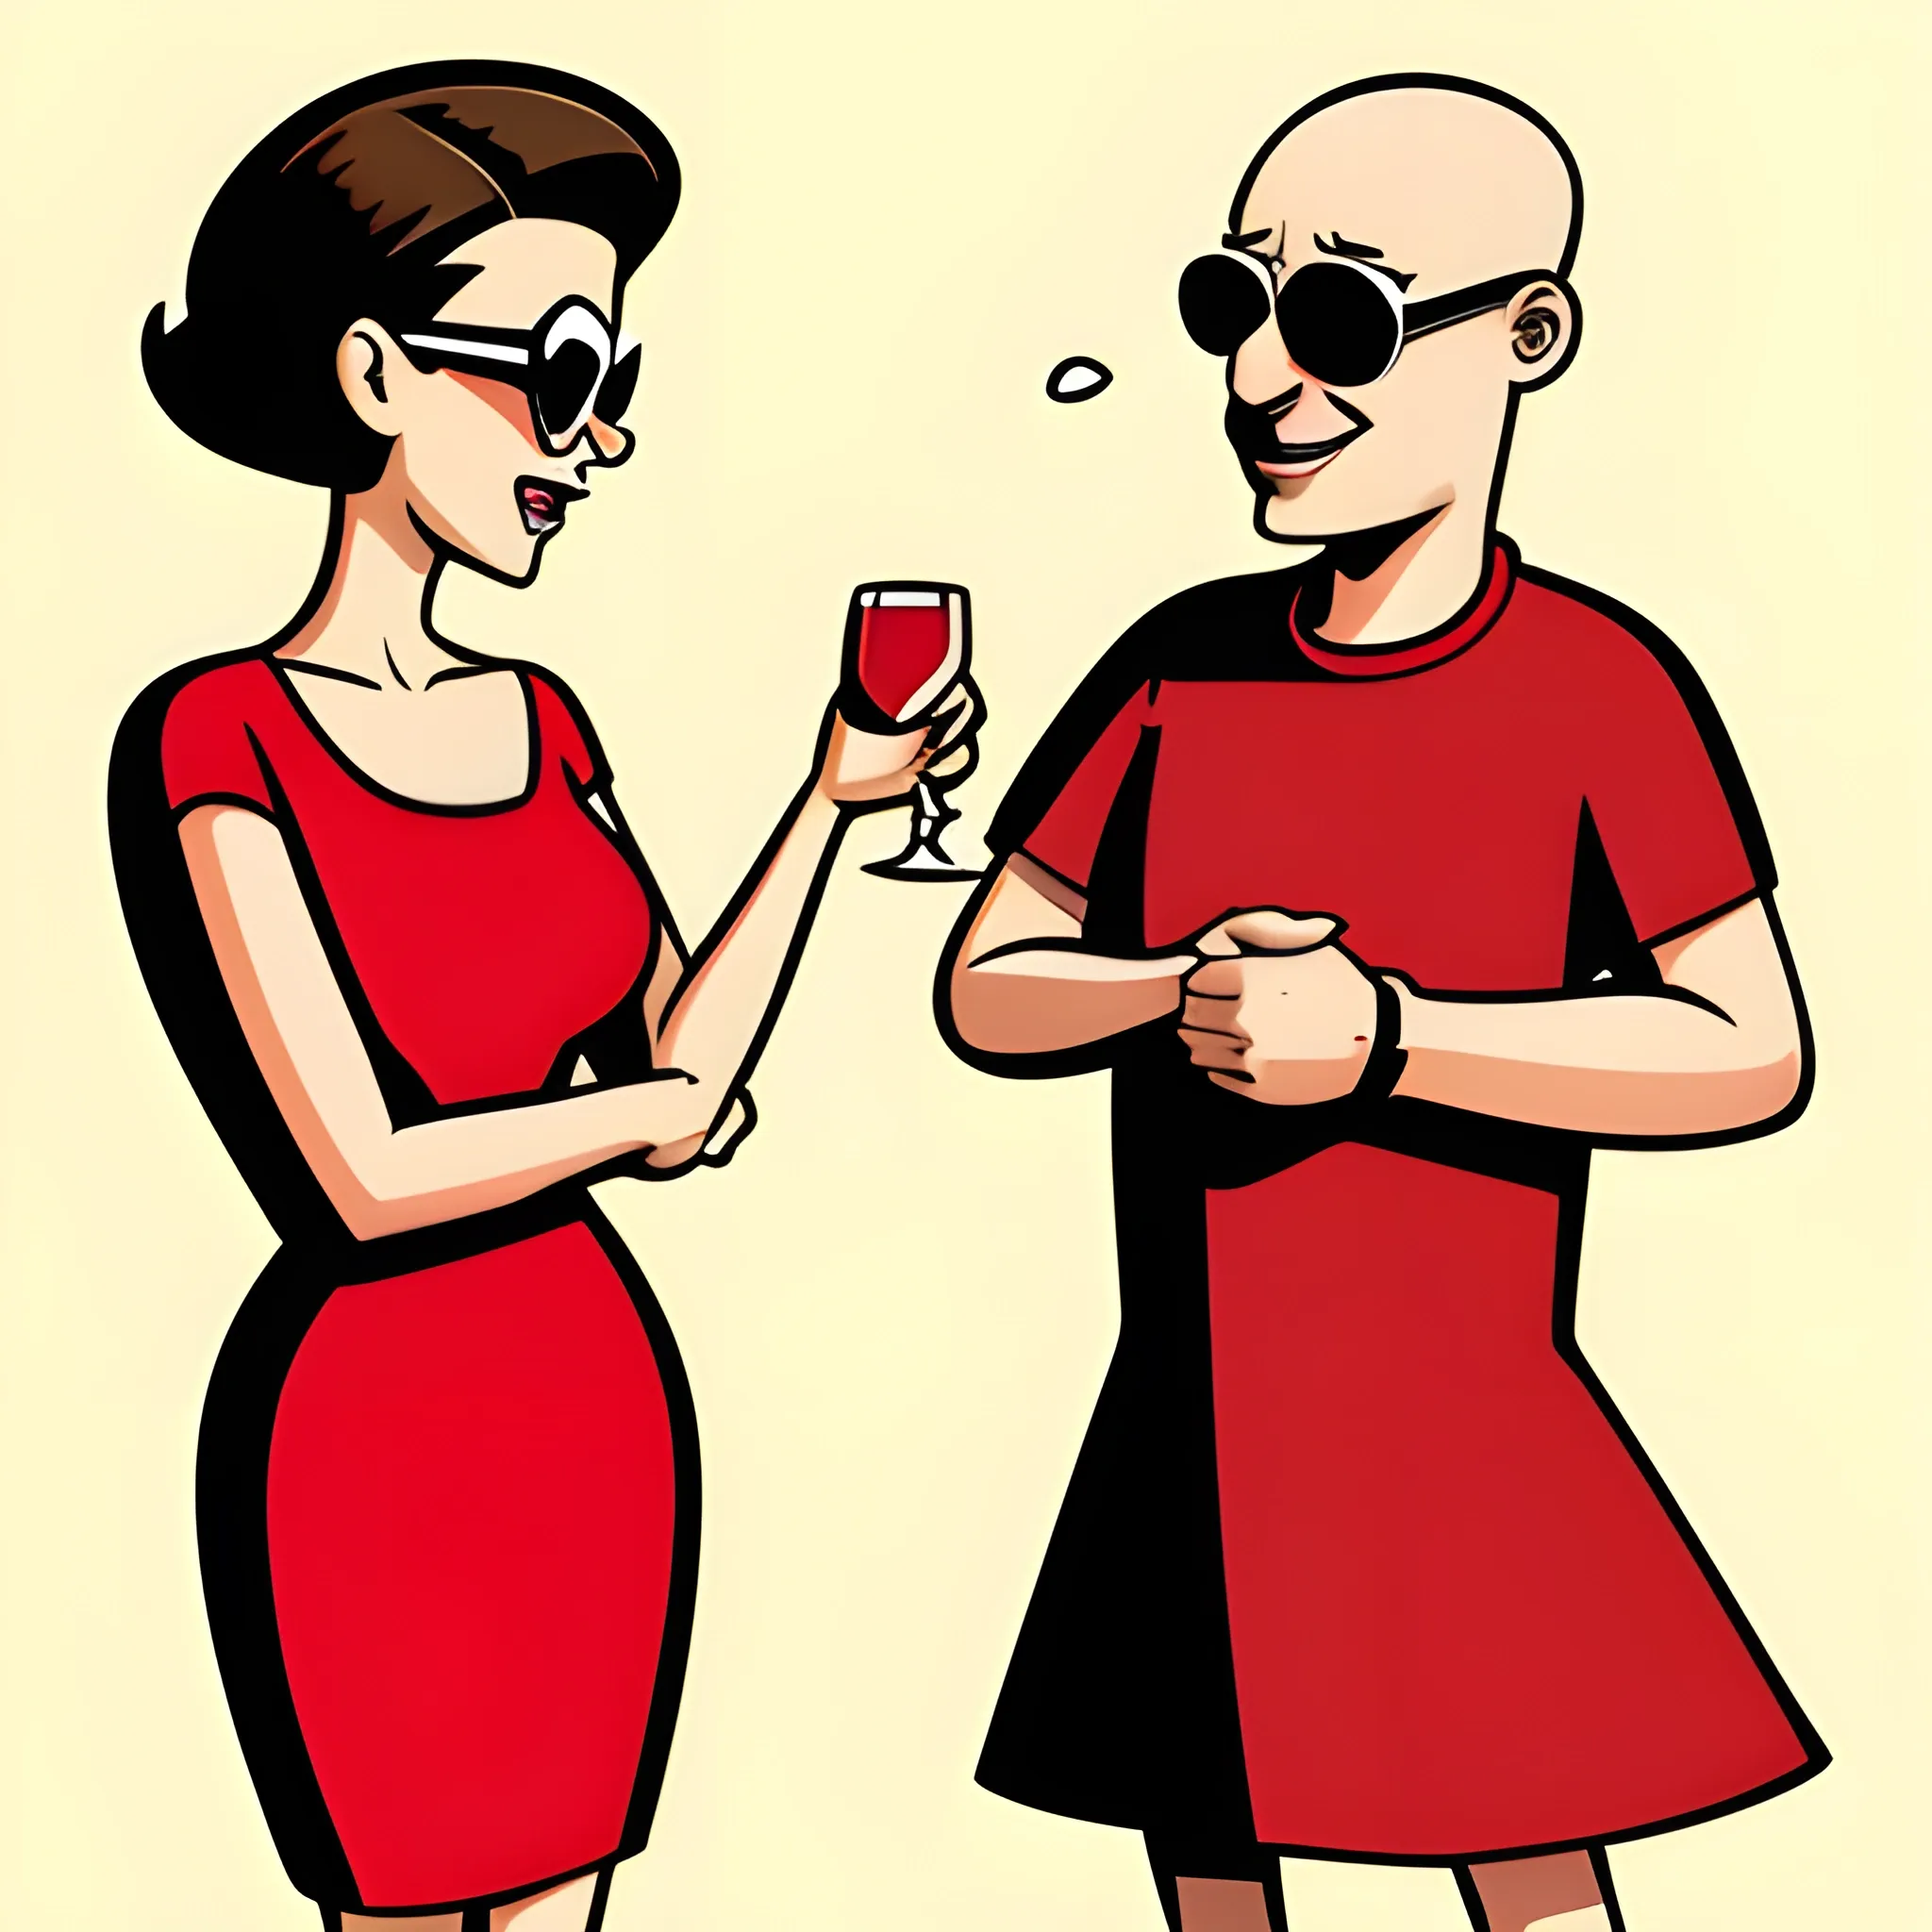 , Cartoon bald guy with sunglasses in a womens red dress with the words conversation nation